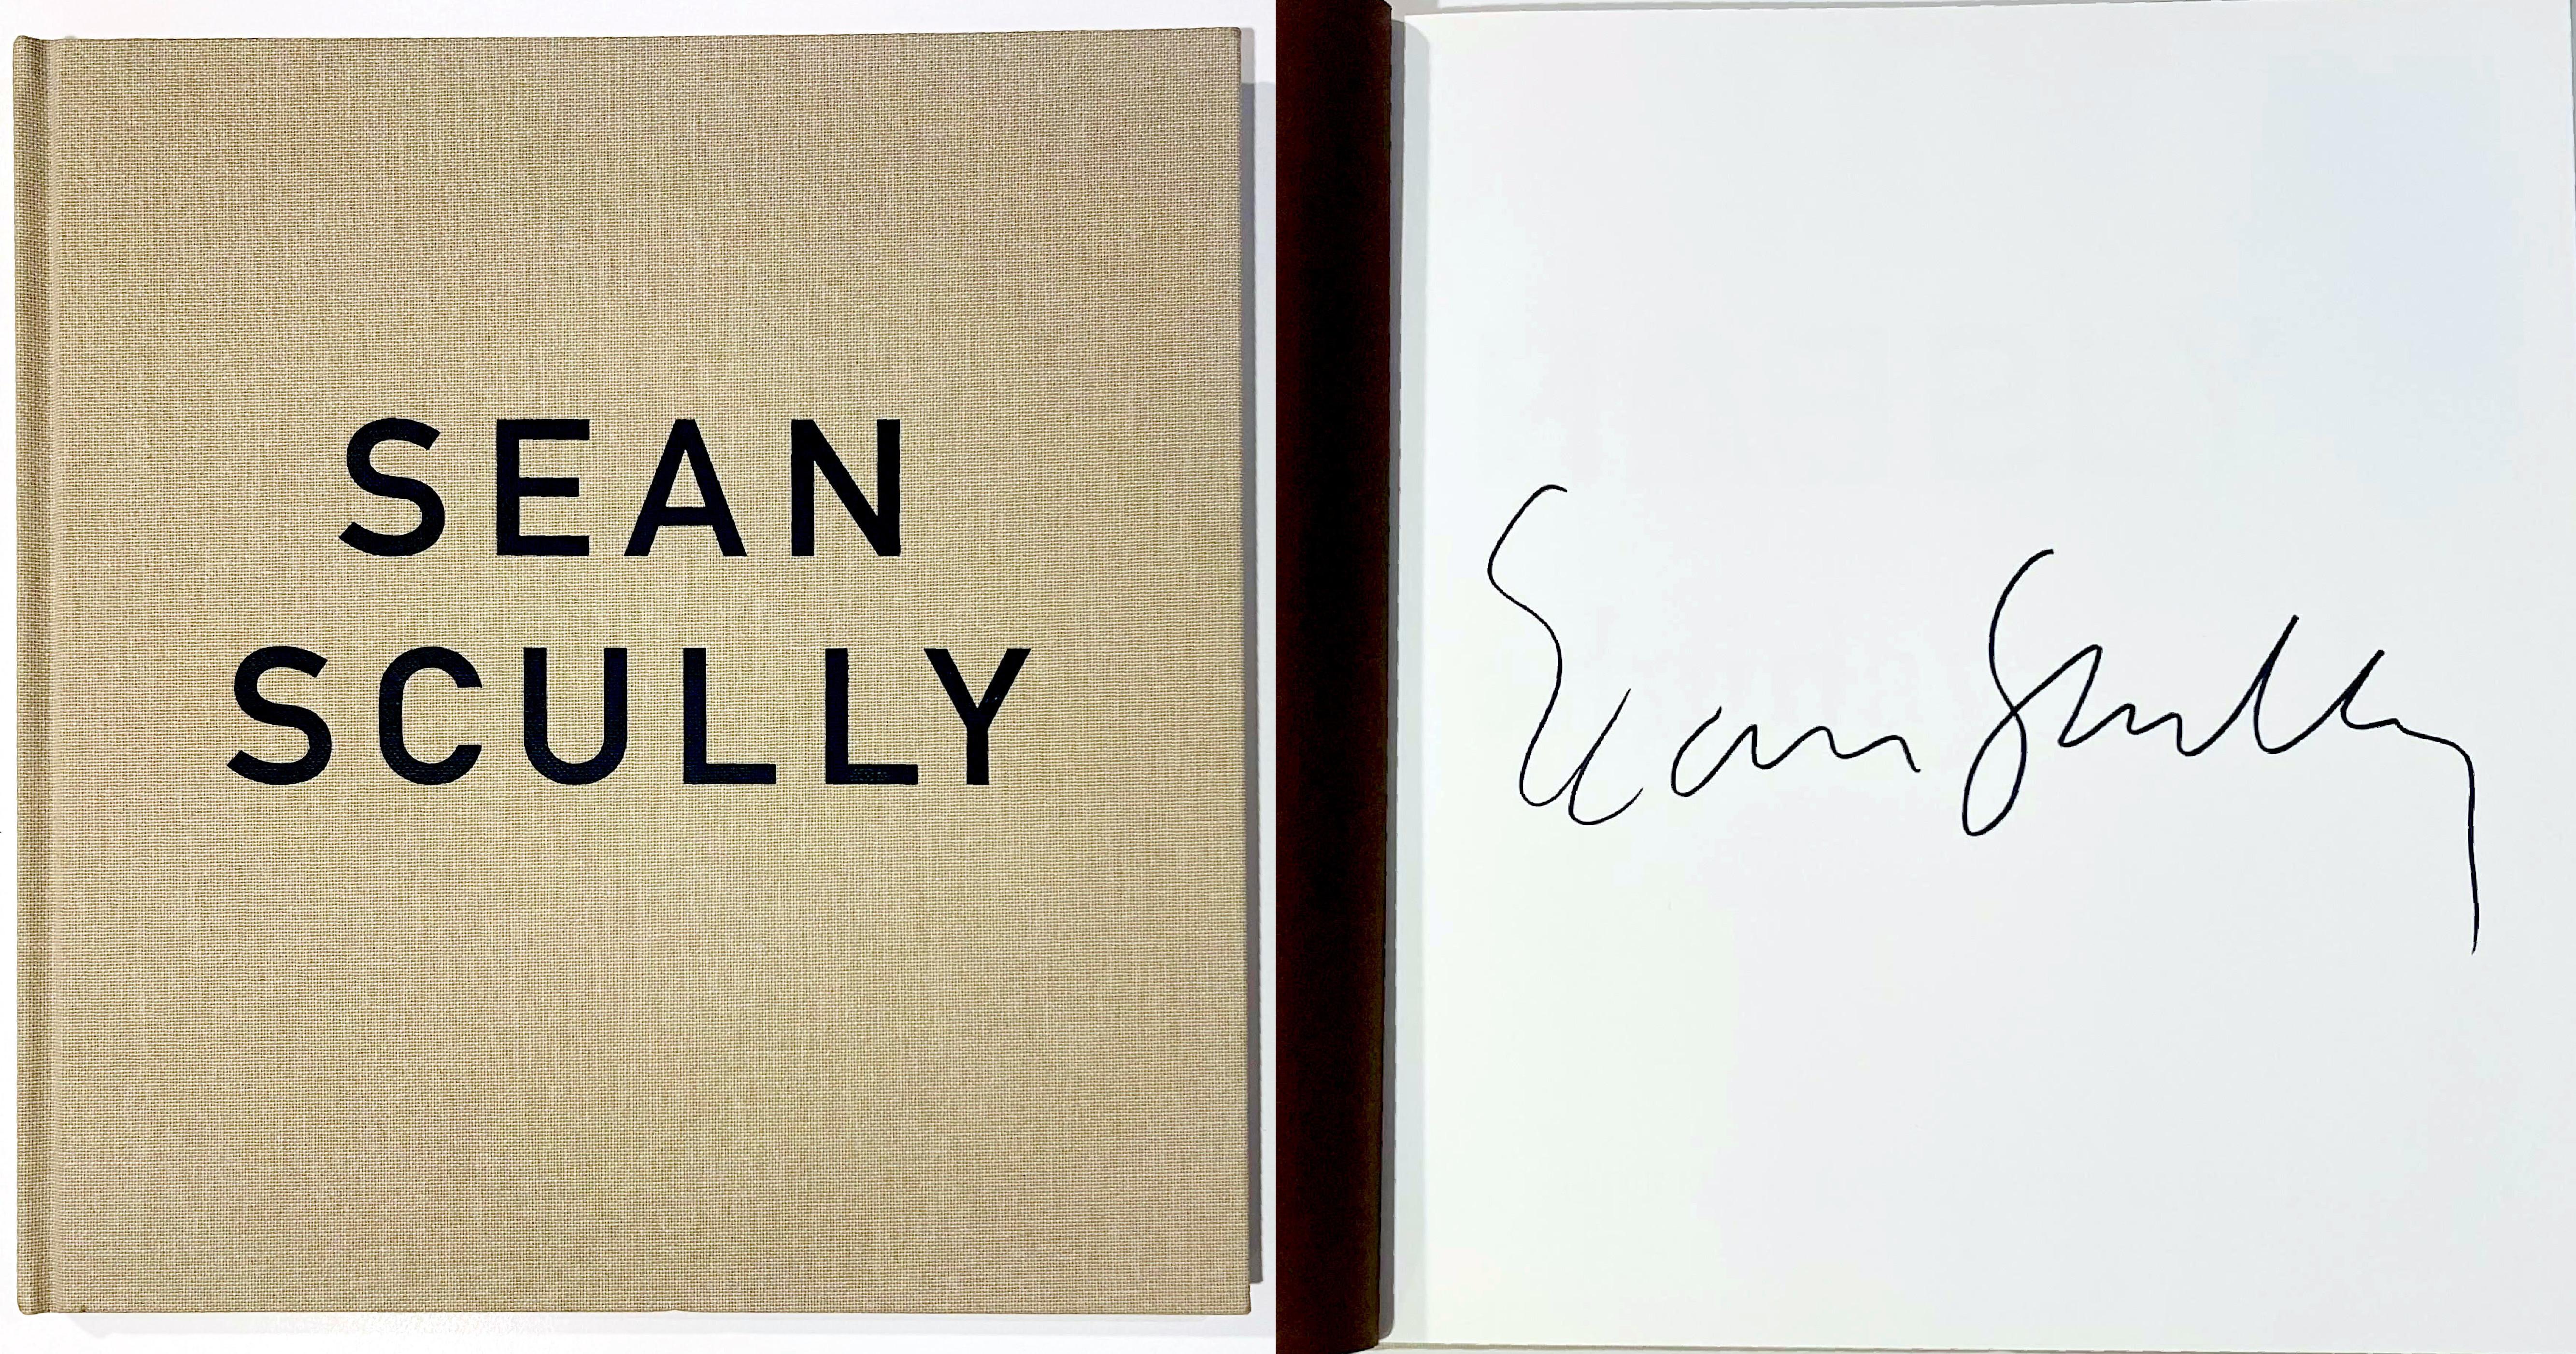 Sean Scully
Sean Scully Night and Day (hardback monograph, hand signed by Sean Scully), 2013
Hardback monograph with cloth covers and no dust jacket (hand signed by Sean Scully)
Hand signed by Sean Scully on first front end page
13 × 11 1/2 × 3/4